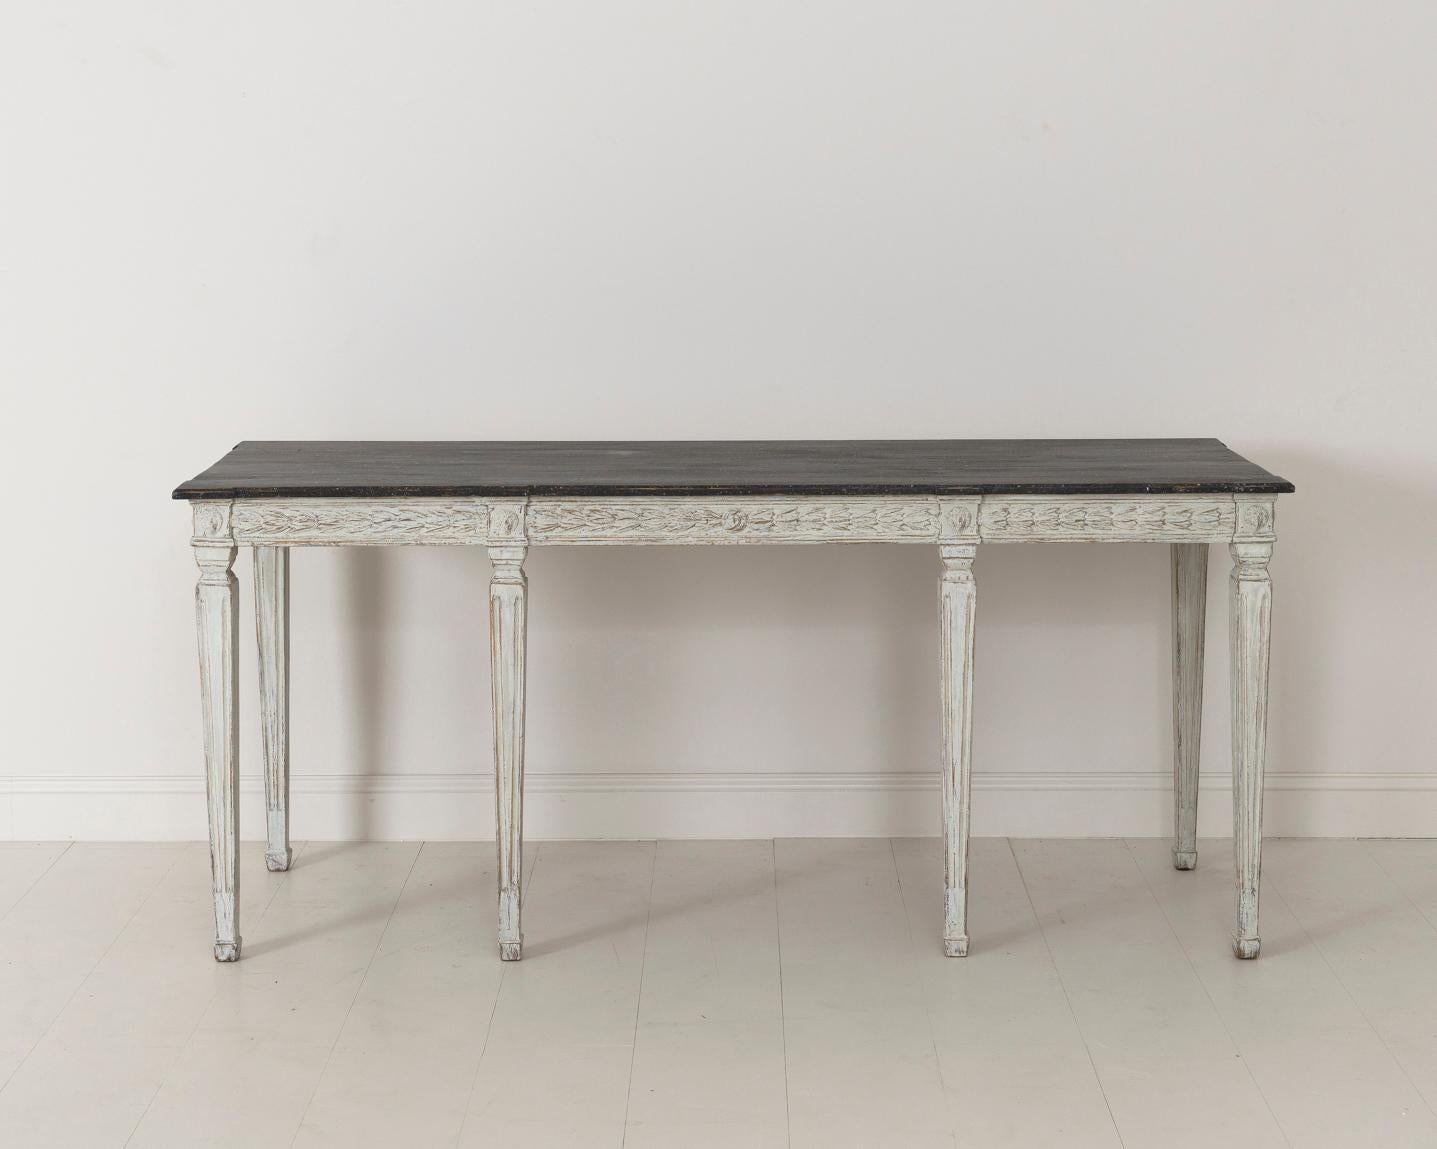 Swedish late Gustavian console table from the 19th century with hand painted black porphyry top. The apron is decorated with bell flowers and the leg posts with lion heads. This beautifully classic table is raised upon square tapered and channeled